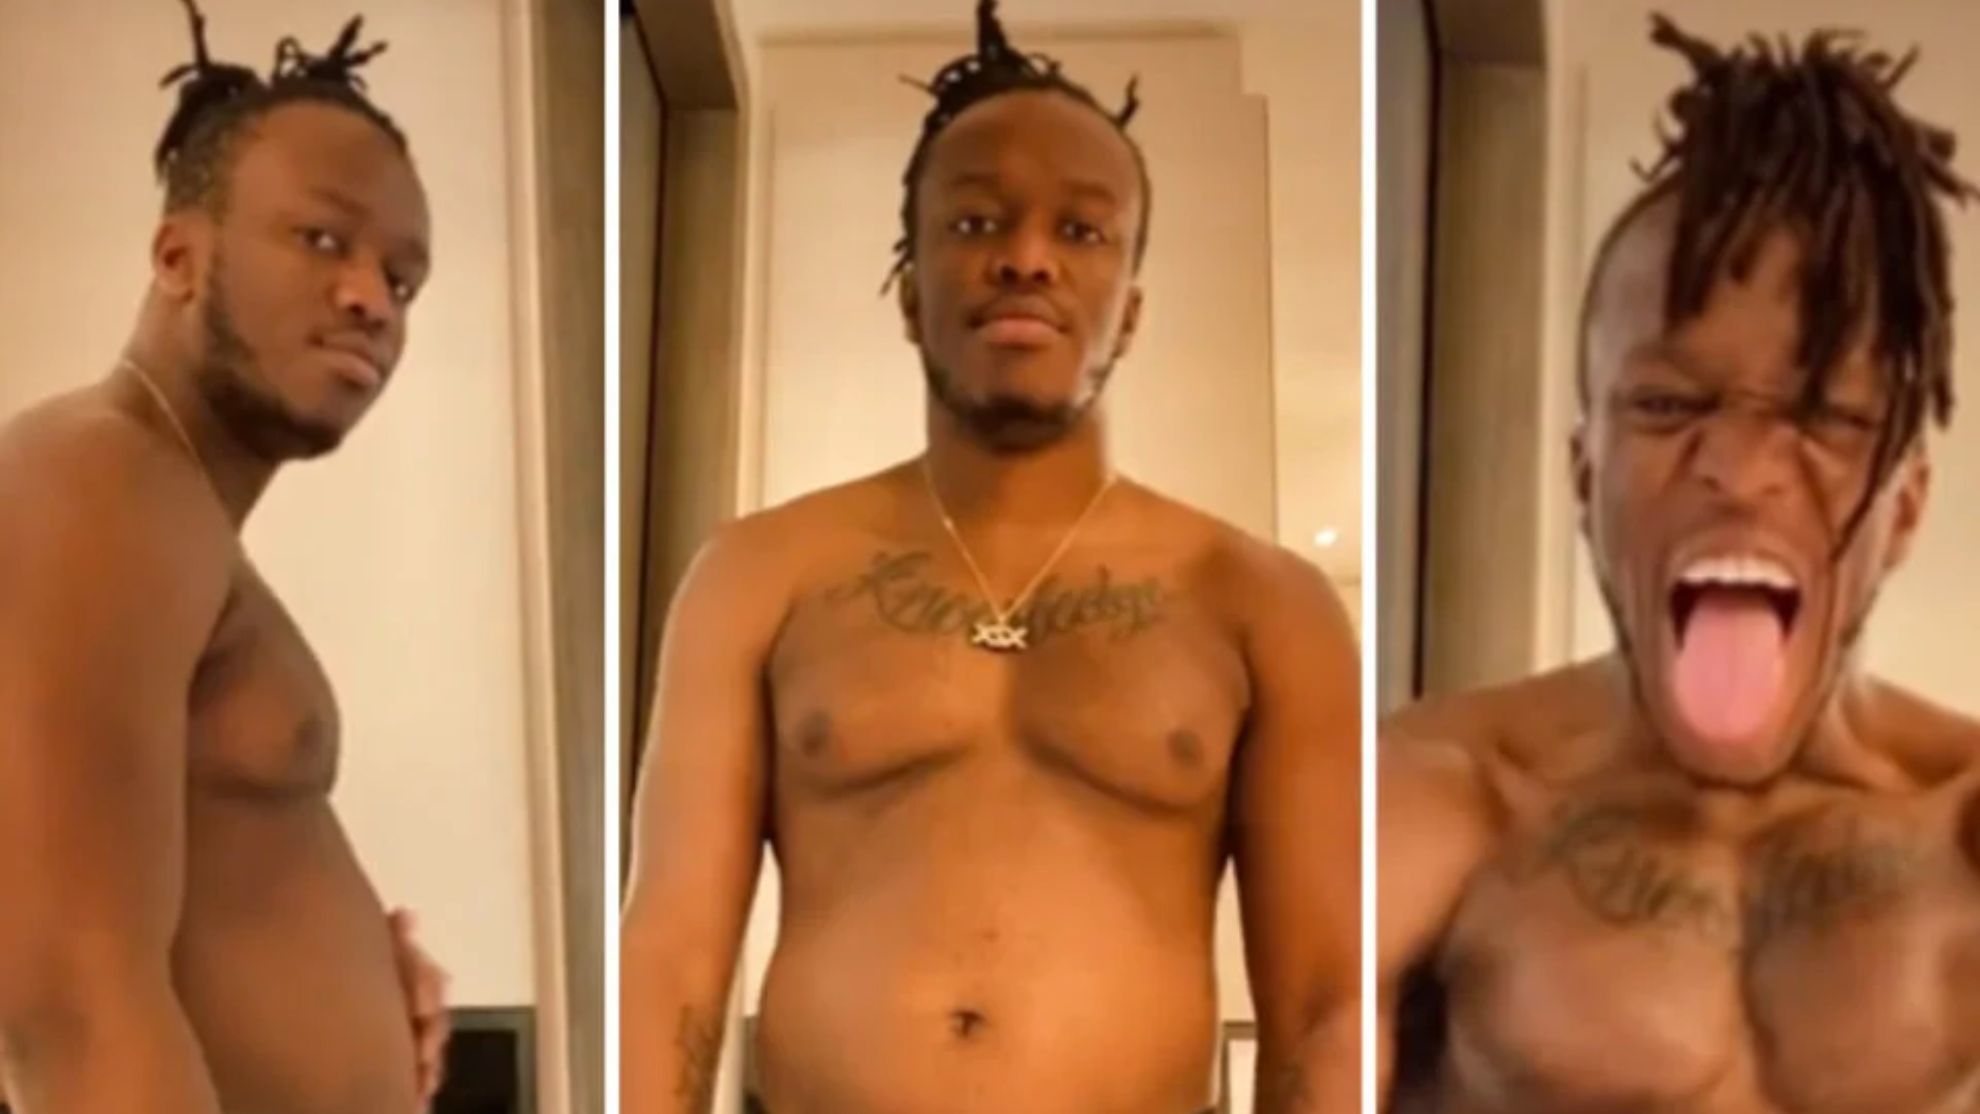 KSI calls out Jake Paul and shows insane body transformation